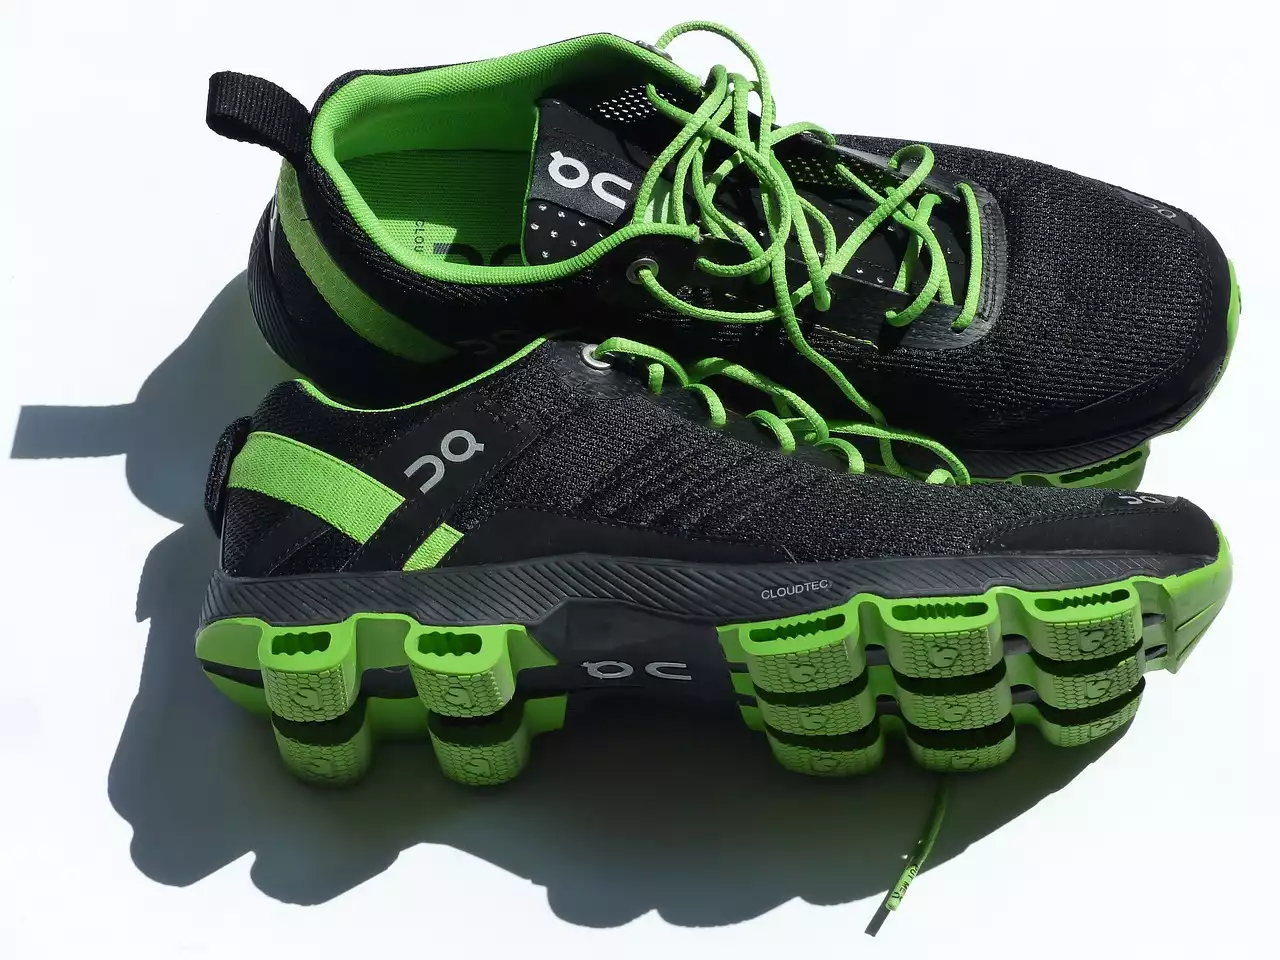 Trail Running Gear: Essentials for Comfort and Safety on the Trails